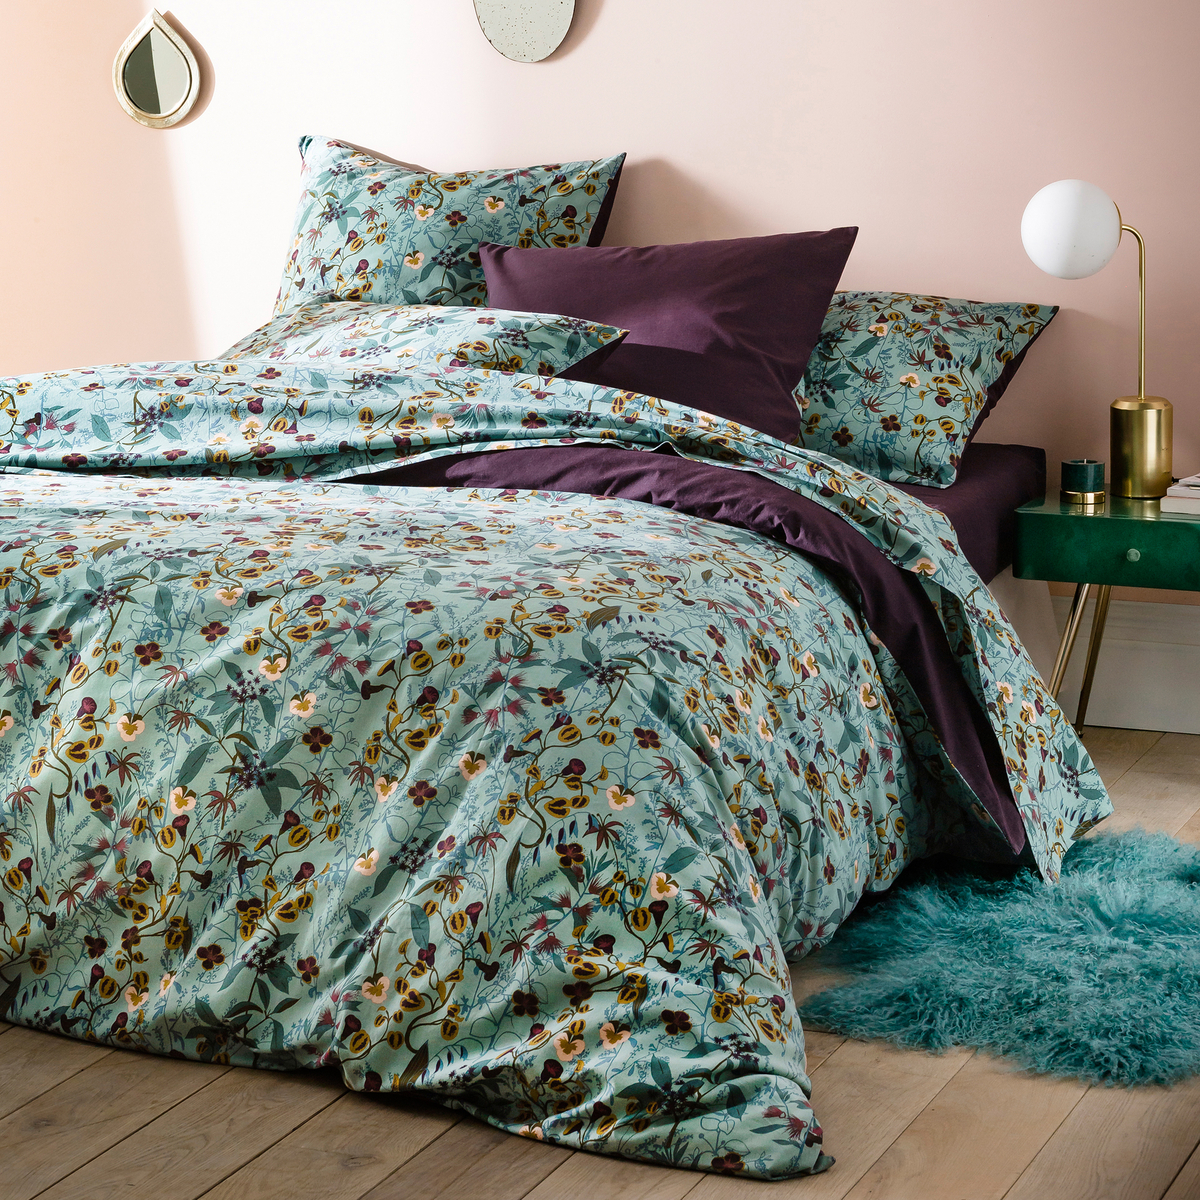 Beronise Floral 100% Washed Cotton Duvet Cover